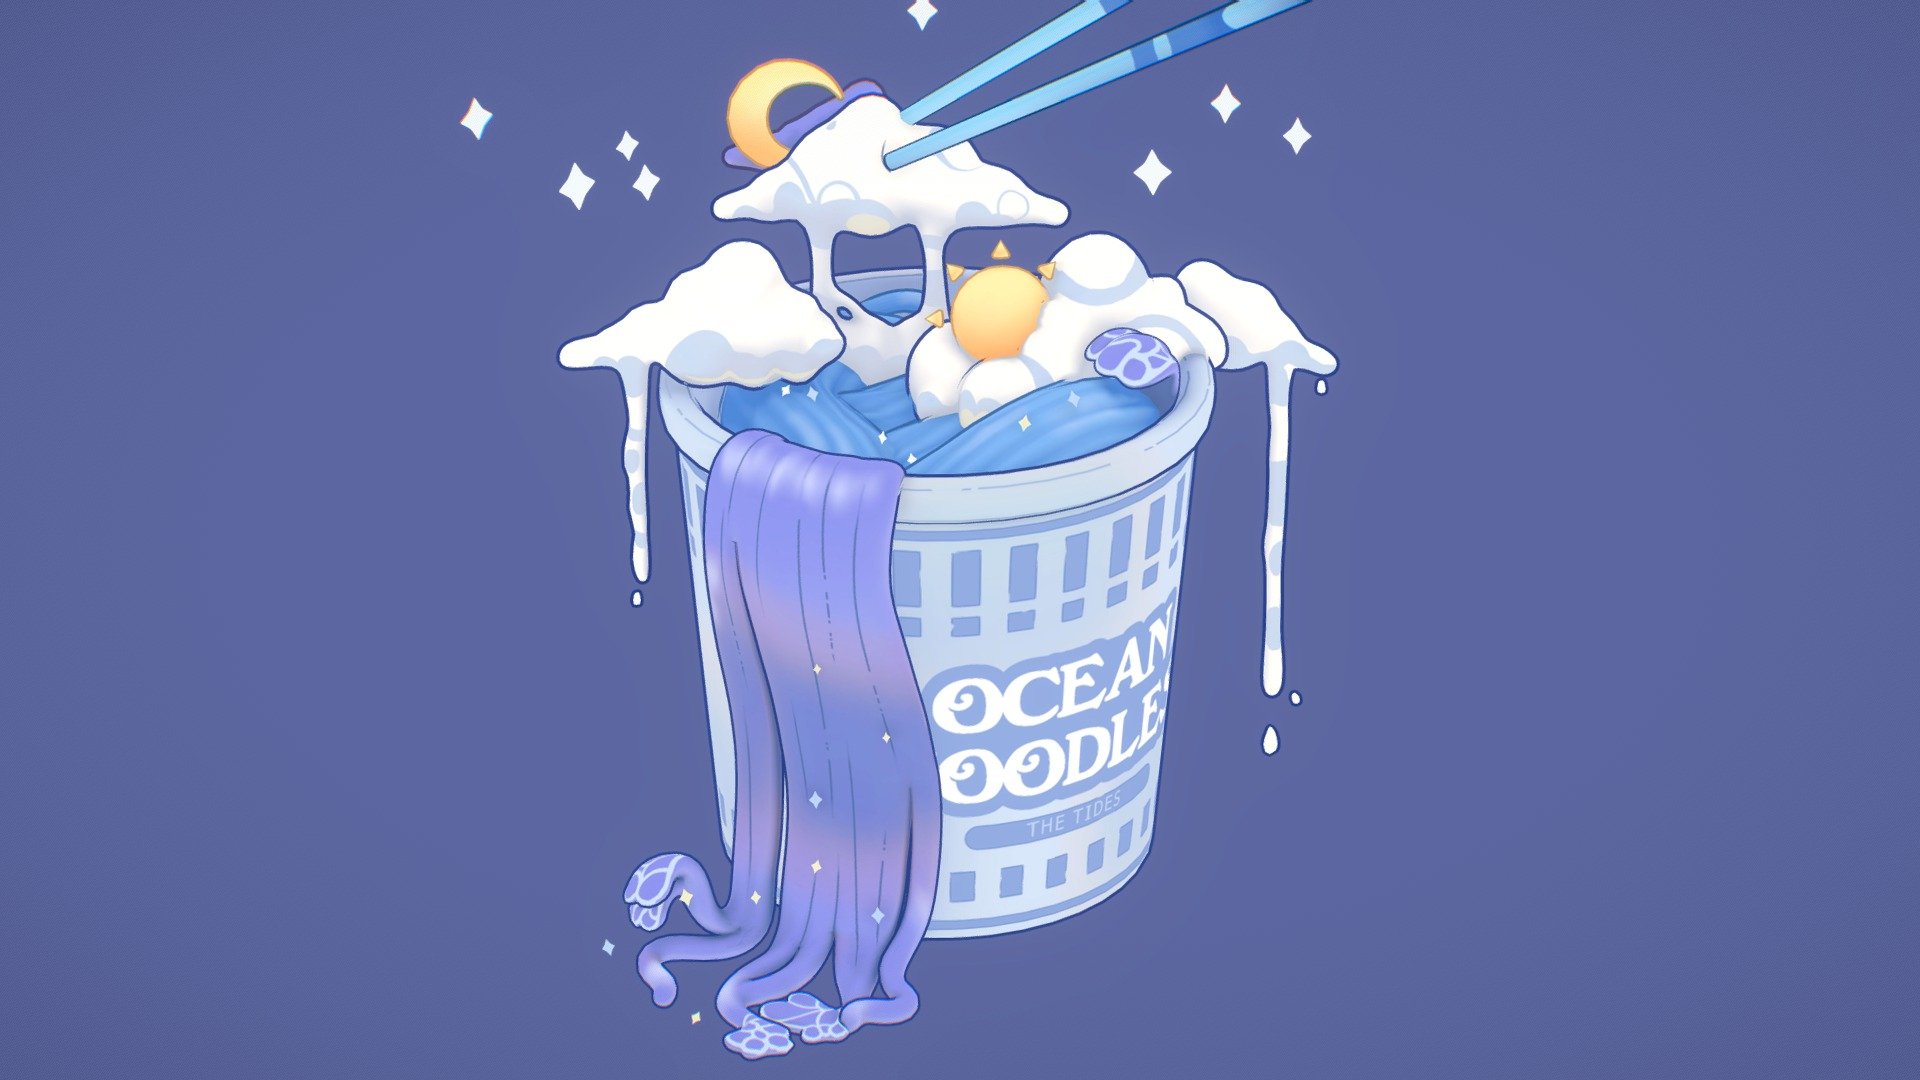 My latest small project ocean ramen! ༄ 
I am happy to share my newest work! I am currently busy with a bigger project so I post a bit less, but I really loved this idea!

I hope you like it! ༄

concept inspired by teri sky - Ocean noodles 🍜༄ - 3D model by Moon (@Moon_solstice) 3d model